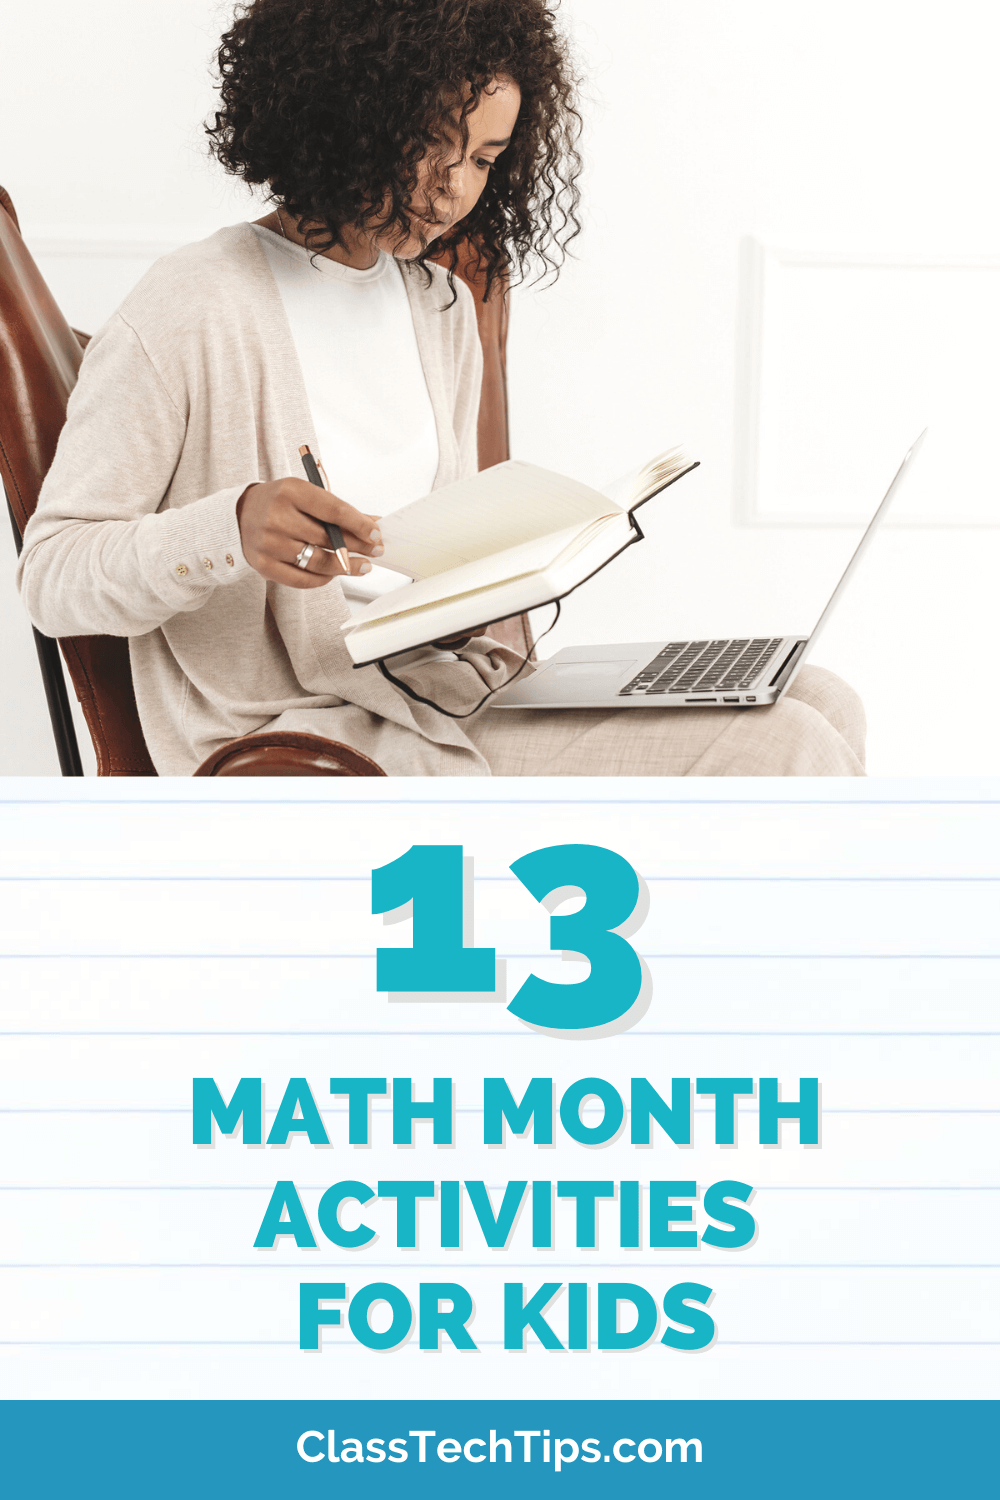 A teacher is reading from a book and using a laptop in a bright room, with a prominent graphic on the image stating "13 Math Month Activities for Kids."